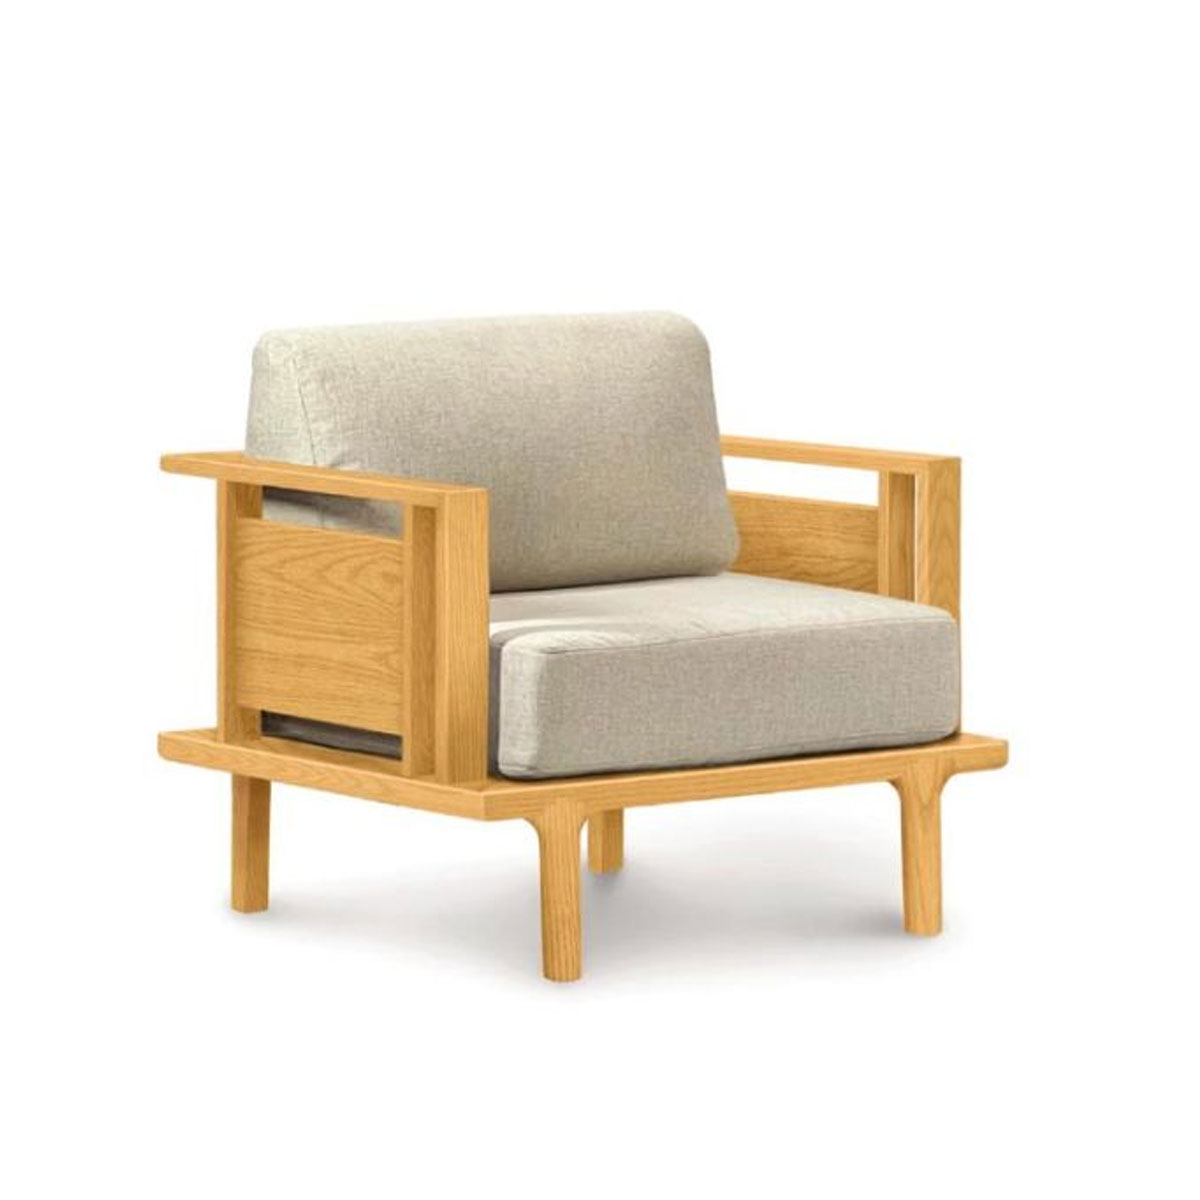 Copeland Sierra Chair with Wood Panels in Cherry